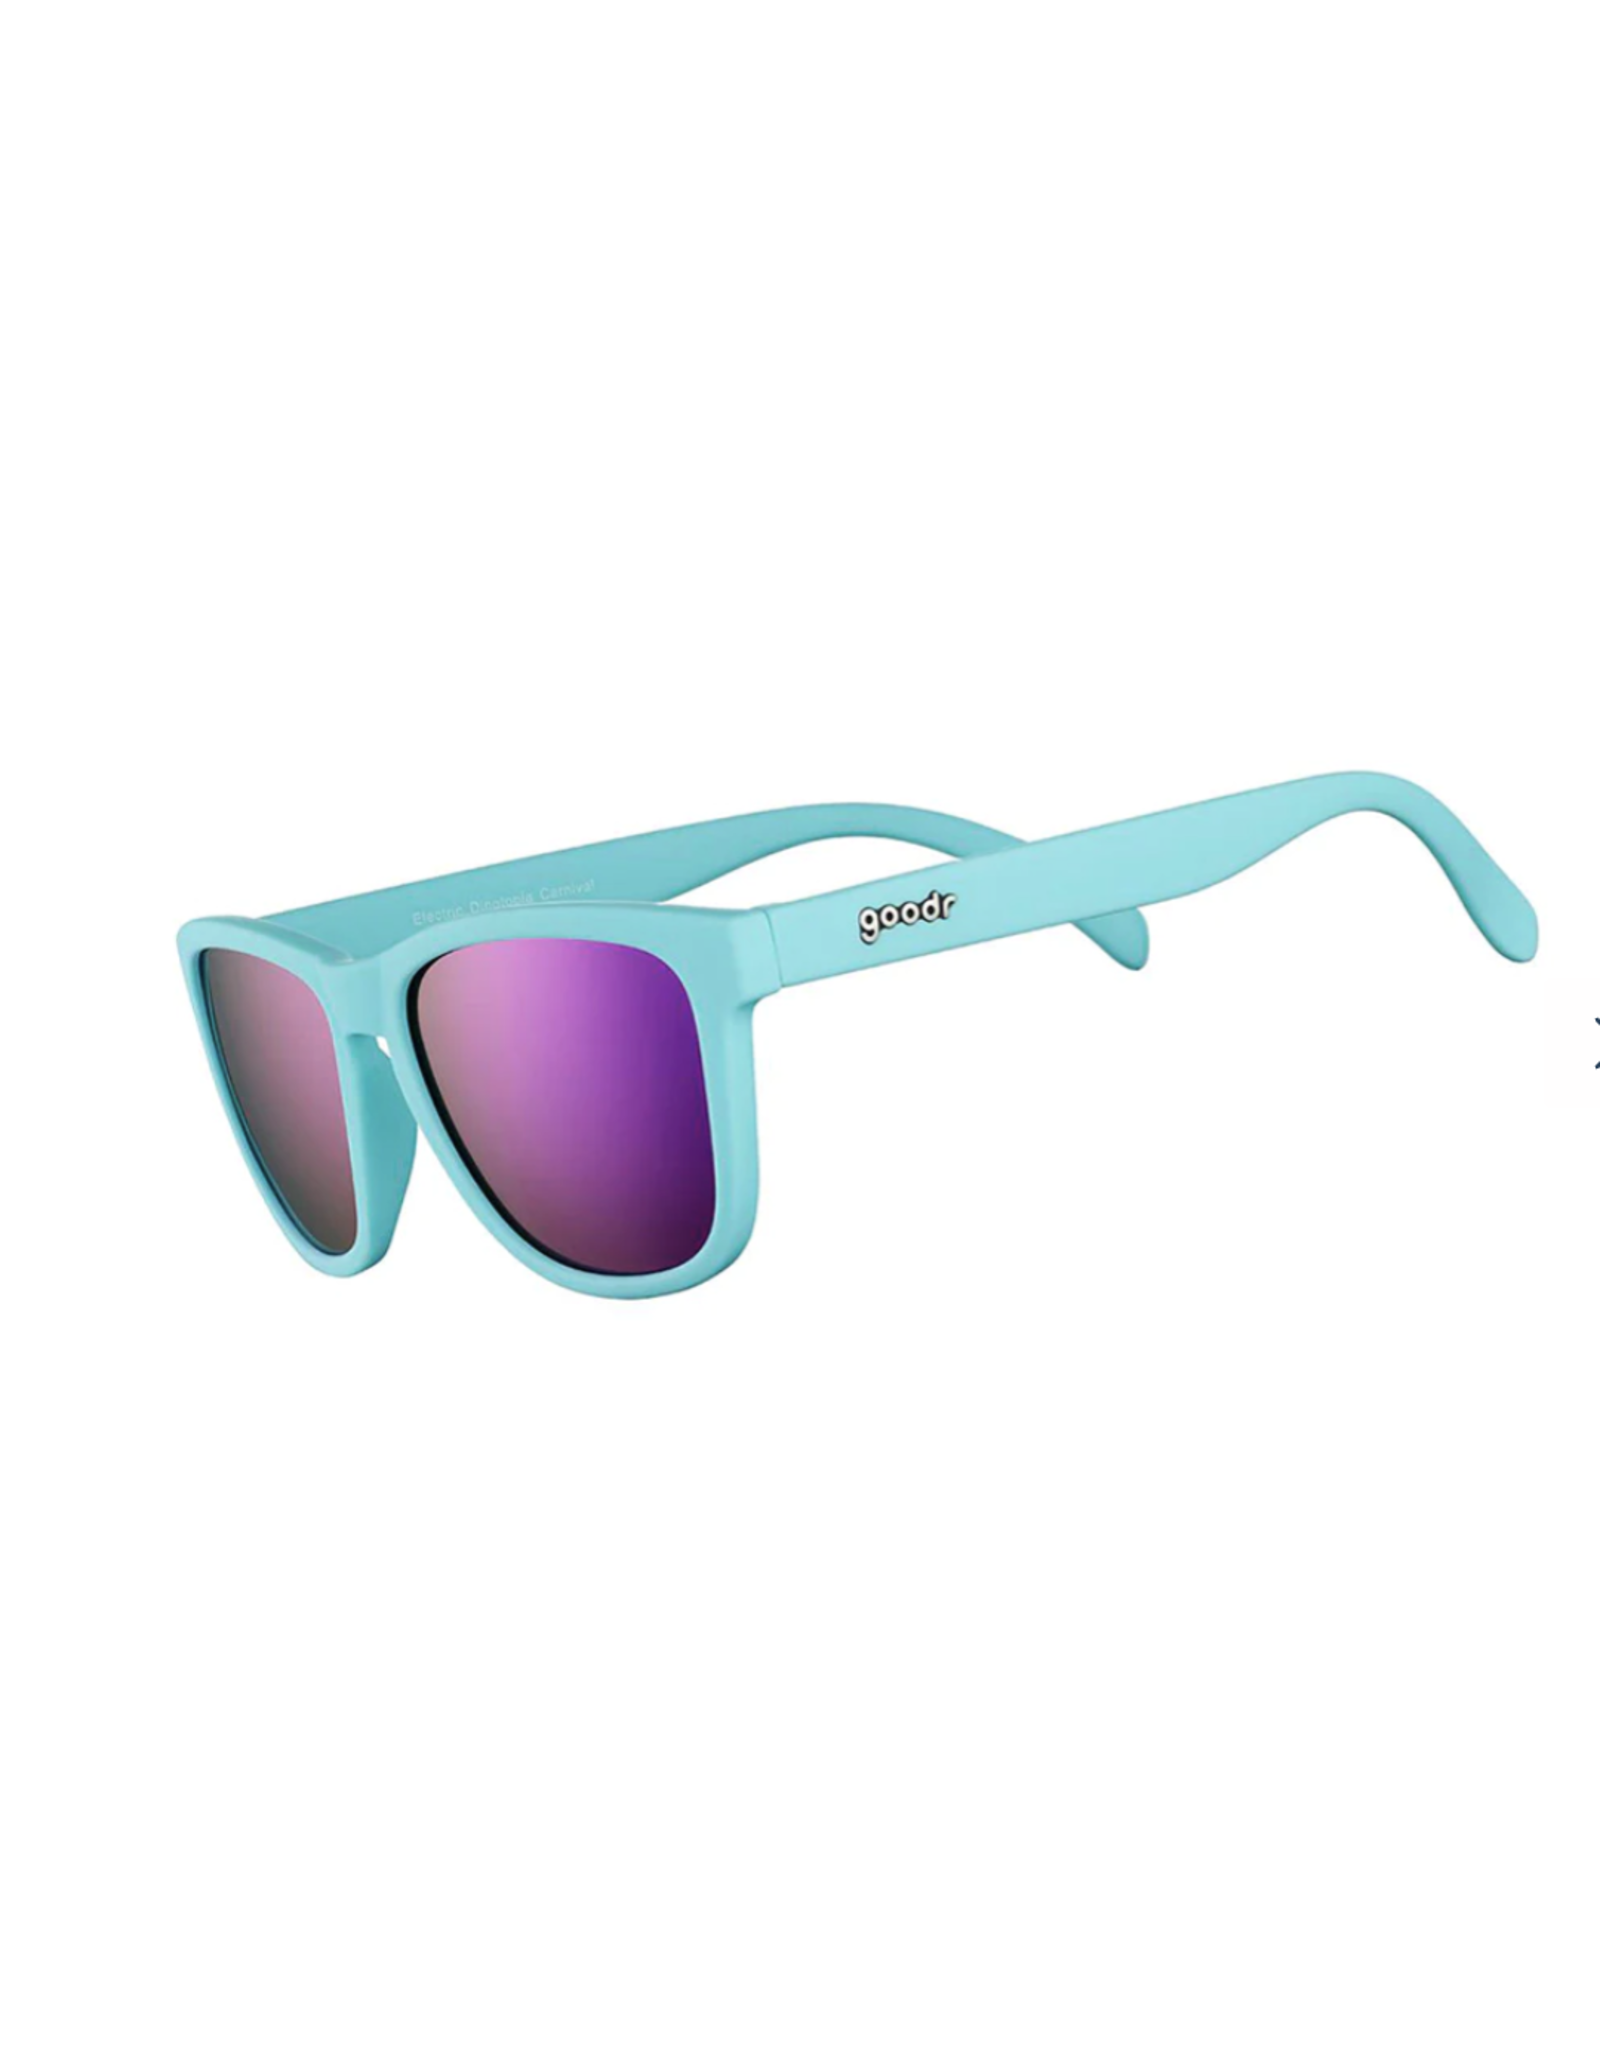 goodr Electric Dinotopia Carnival Sunglasses by goodr